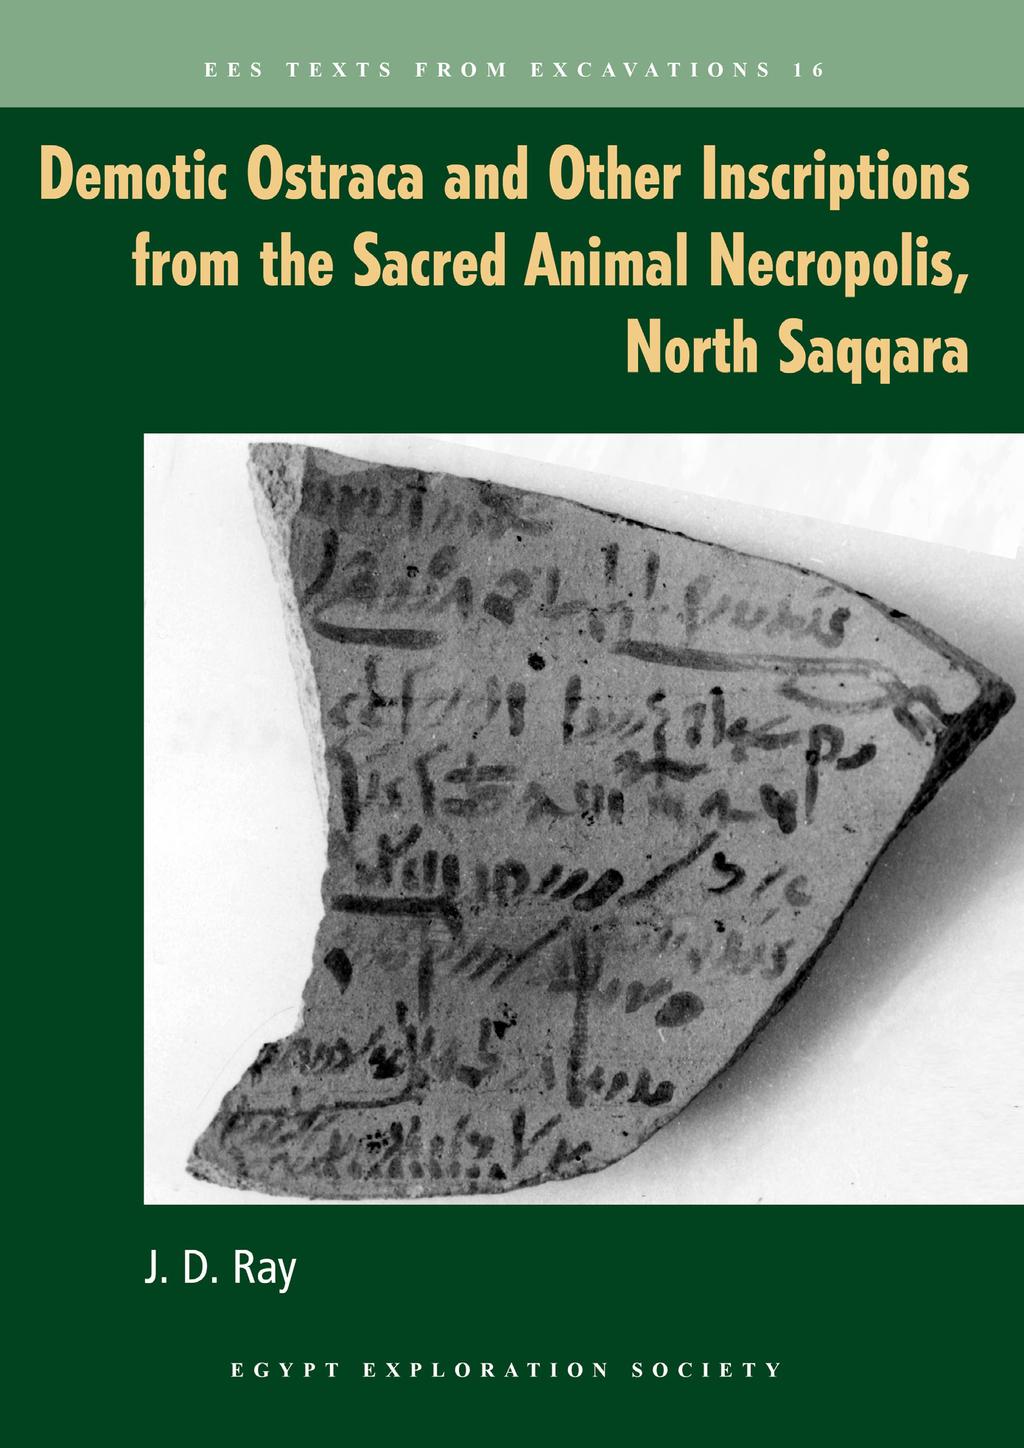 Demotic Ostraca and Other Inscriptions from the Sacred Animal Necropolis, North Saqqara Author: J. D.